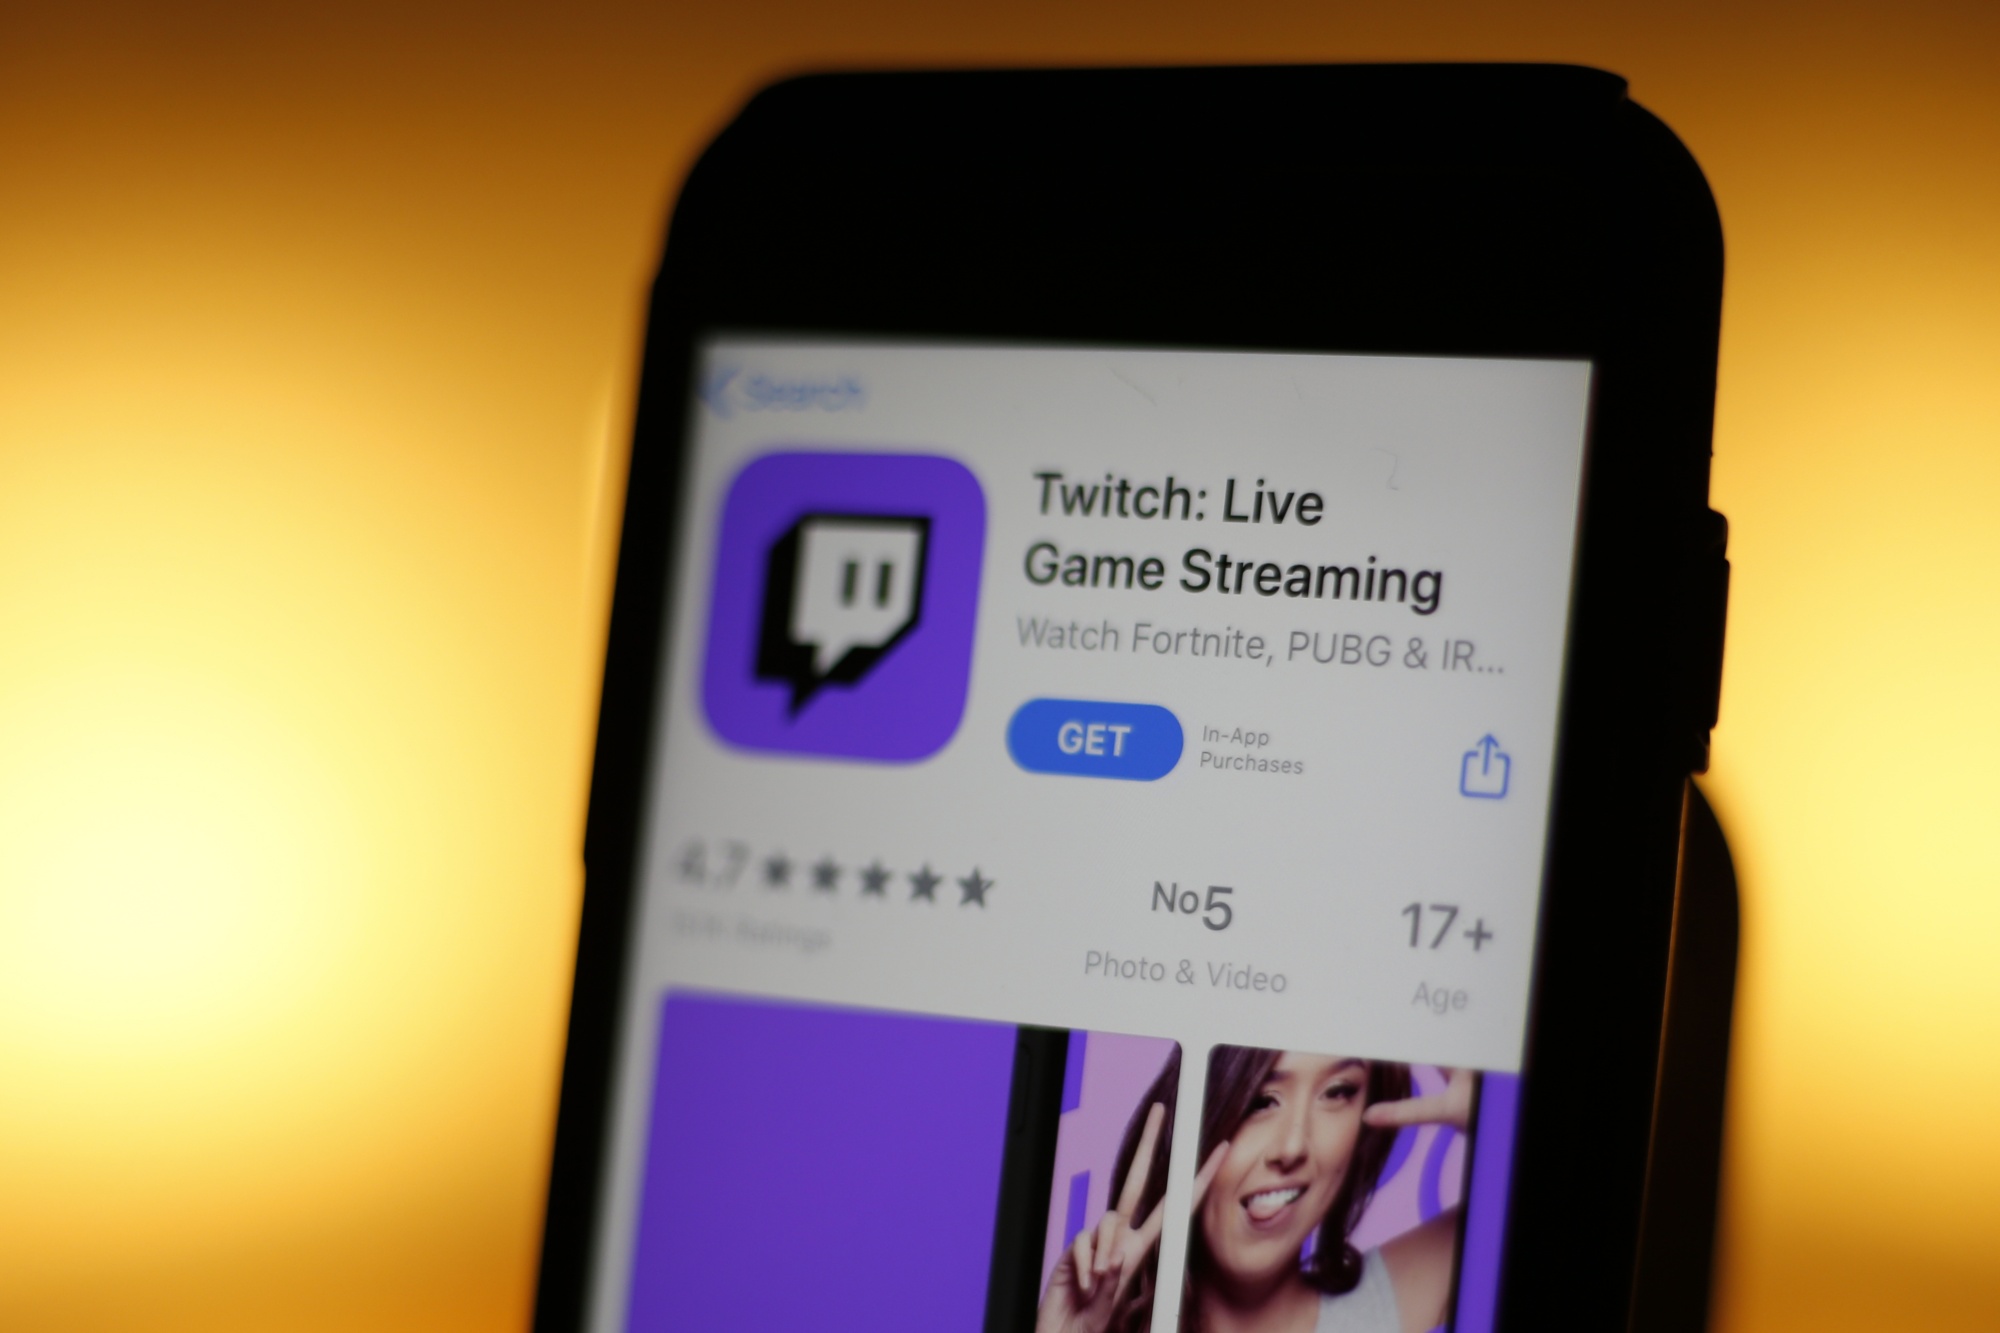 Top Twitch Streamers Show How Evolution of 'Just Chatting' Can